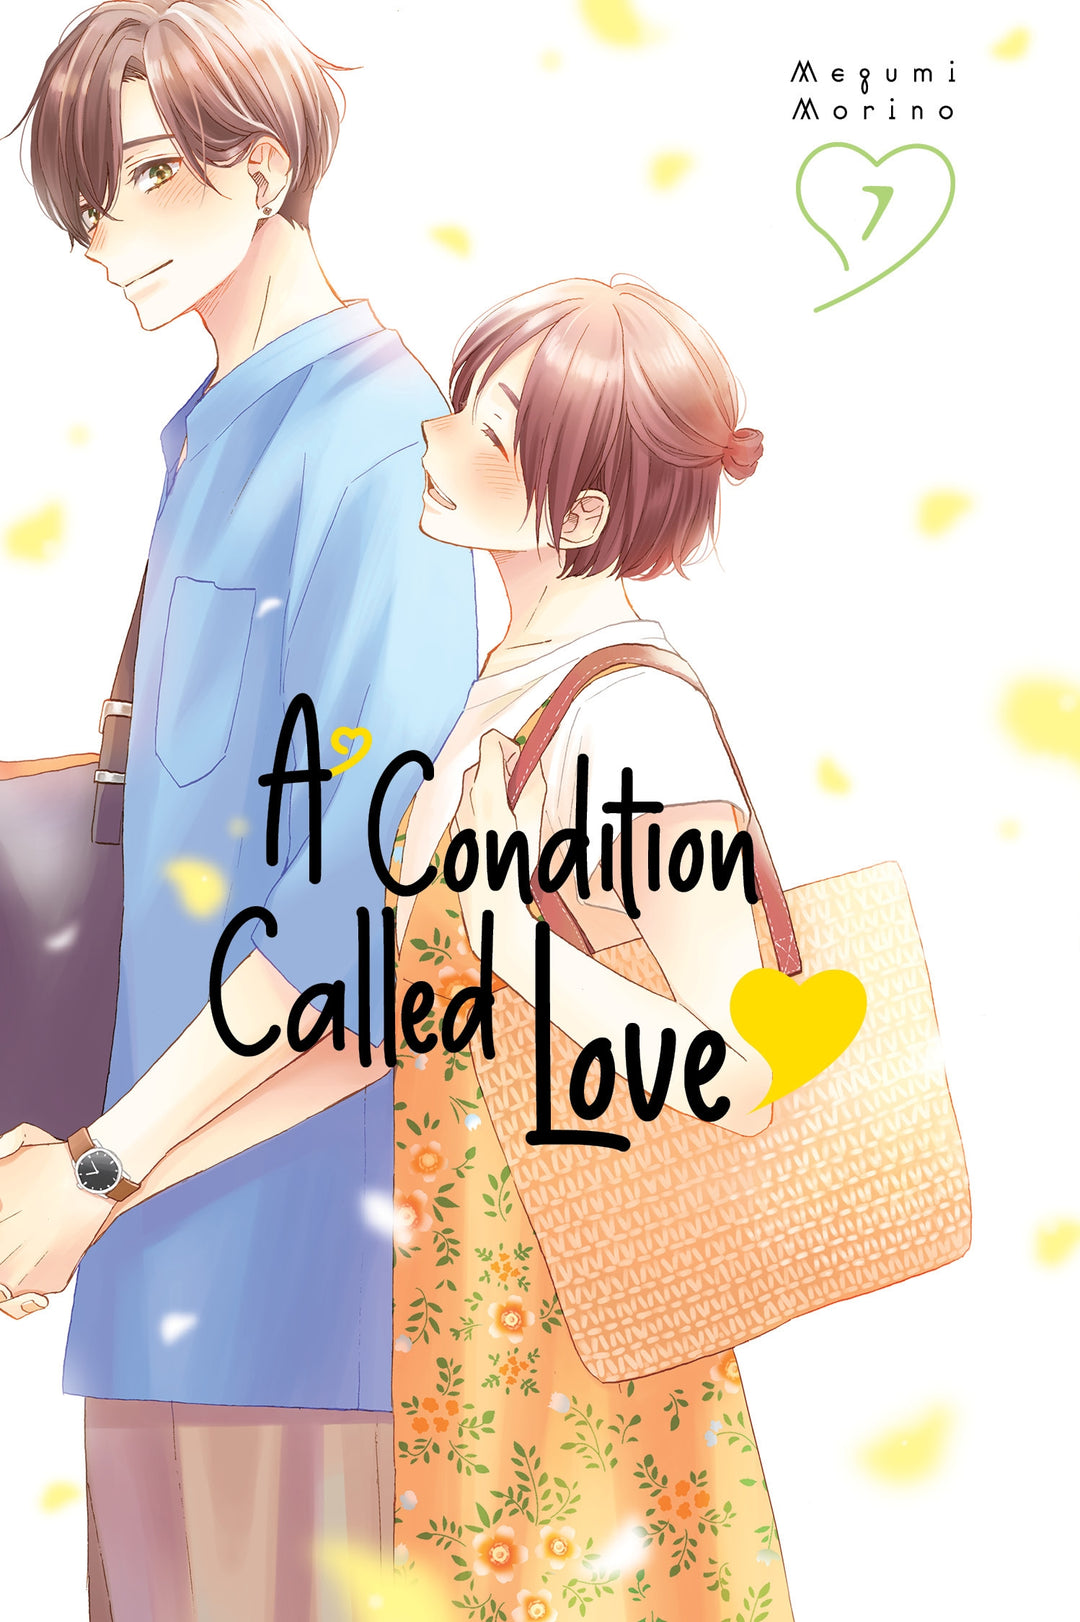 A Condition Called Love, Vol. 07